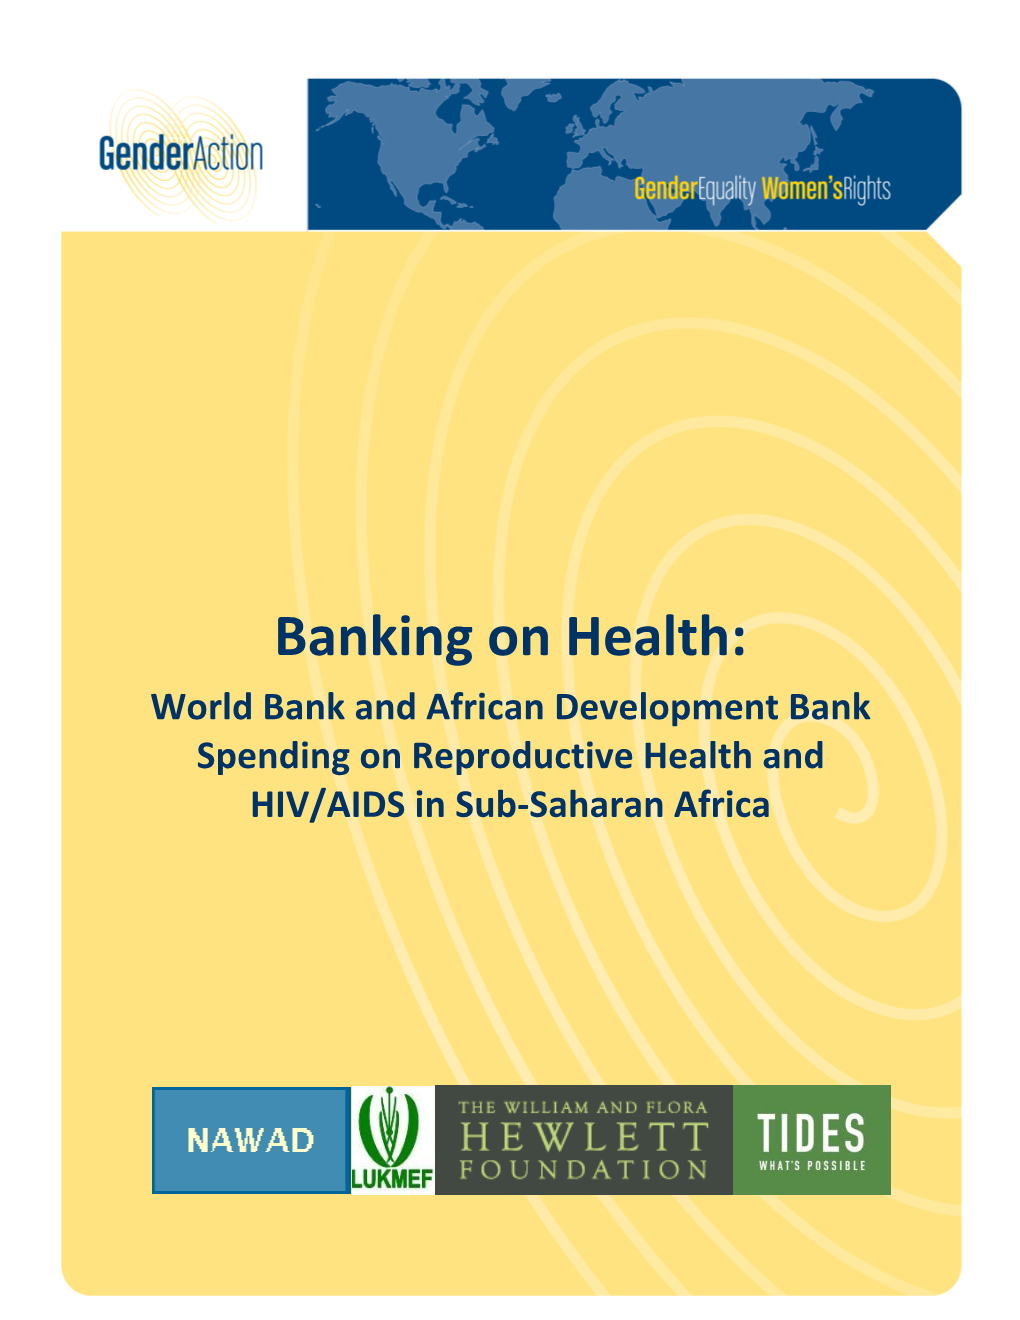 Banking on Health: World Bank and African Development Bank Spending on Reproductive Health And